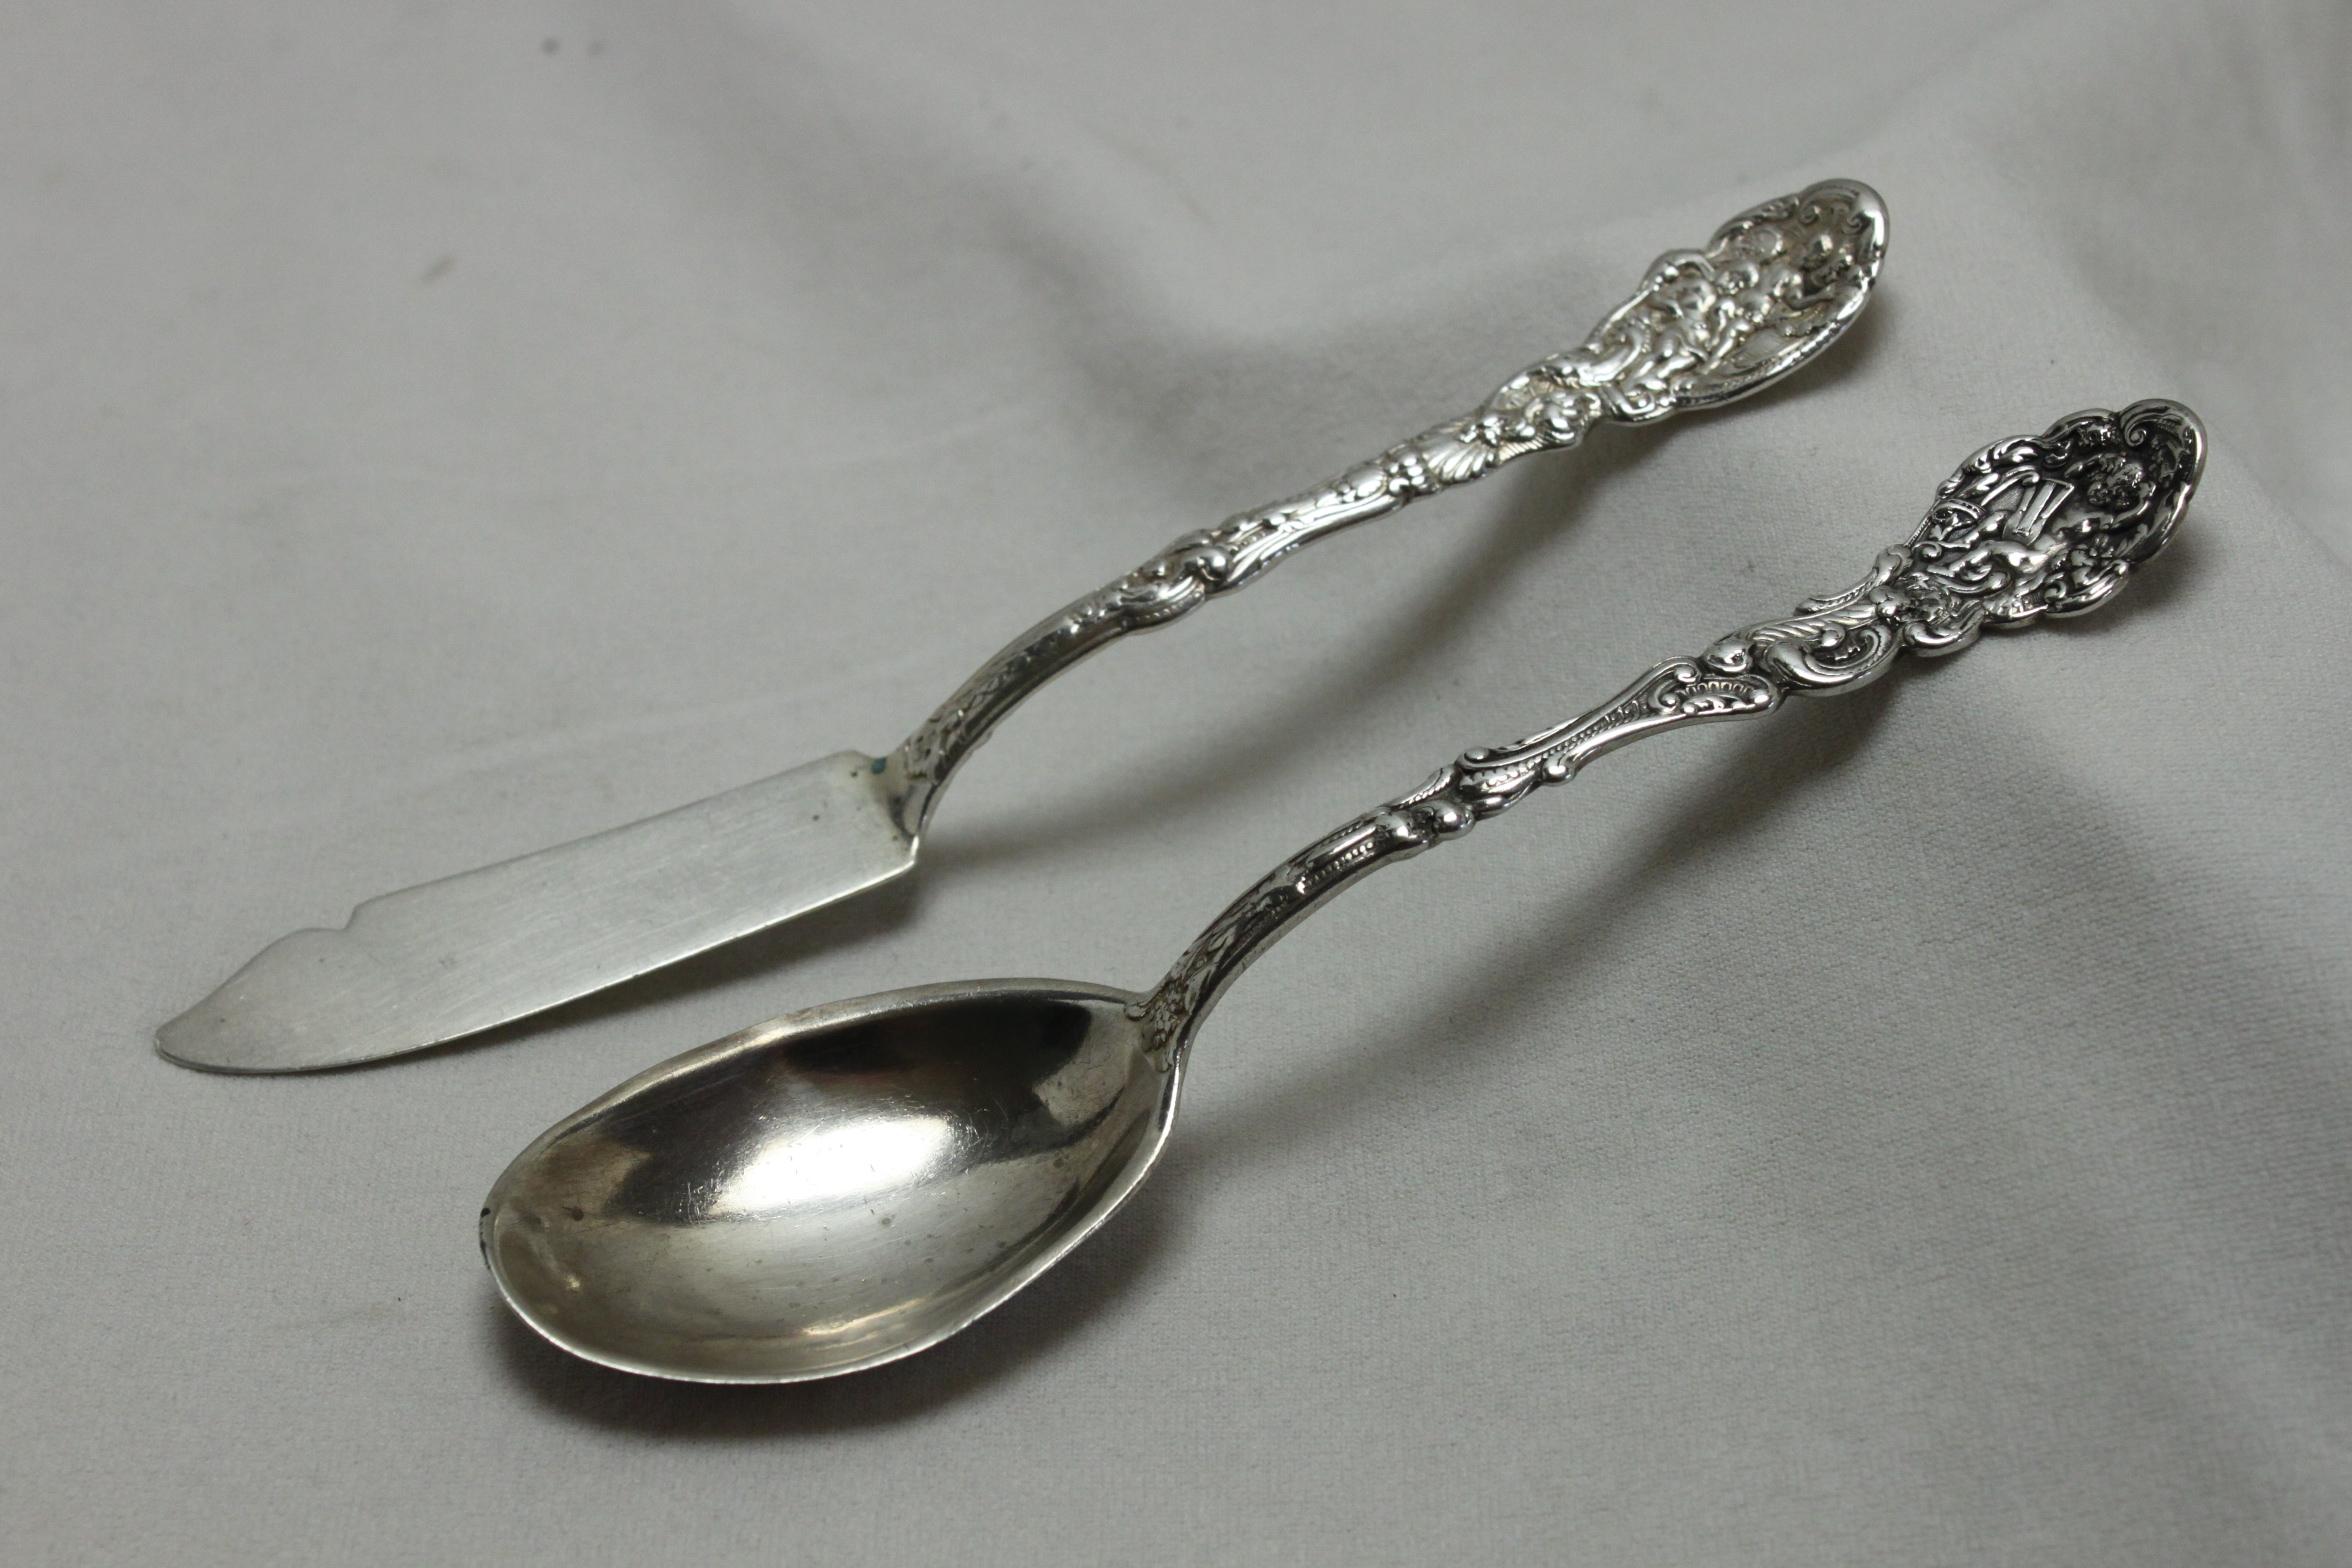 These two pieces of Gorham sterling silver flatware are decorated with the Versailles pattern, which was introduced in 1888. The butter knife, or possibly a pickle knife, is 165 mm (6.5 inches) in length and weighs 34 gms. The spoon measures 153 mm